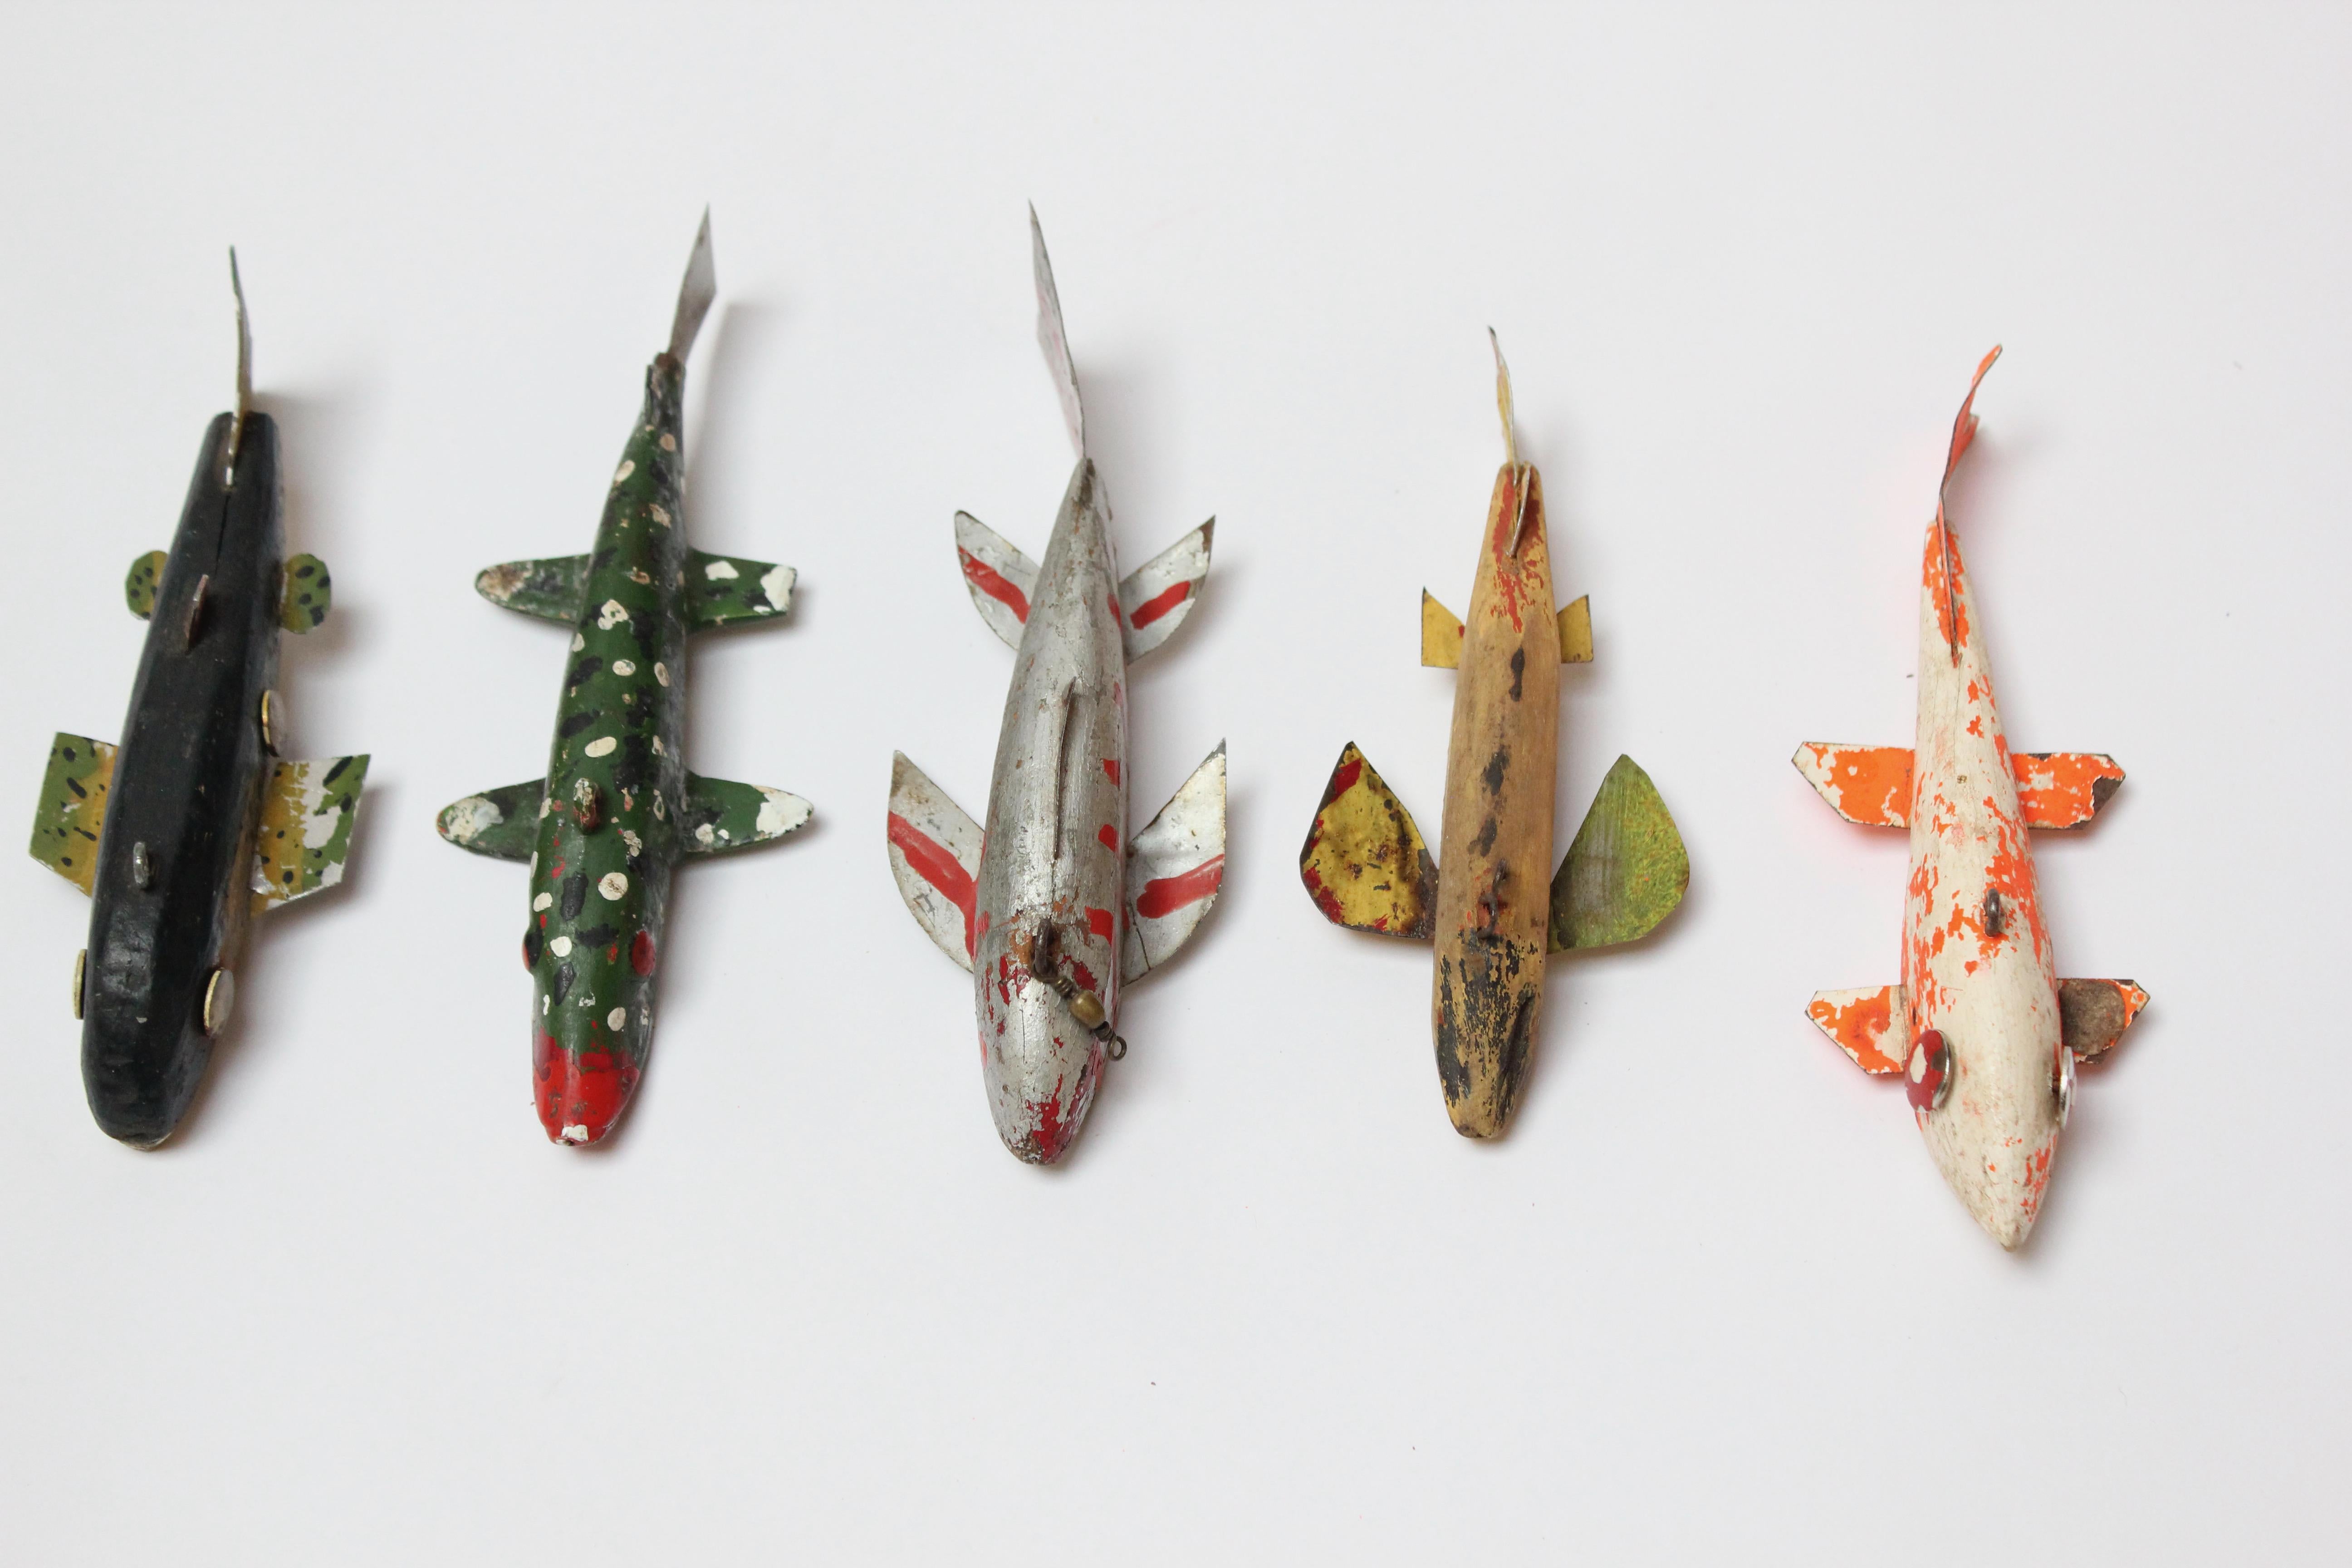 Group of five Folk Art fish decoys composed of painted tinned iron sheet metal or aluminum fins and tails and carved wooden weighted lead bodies, some with applied eyes; others with painted (ca. 1940s-1950, USA). 
Though all parts are intact (fins,